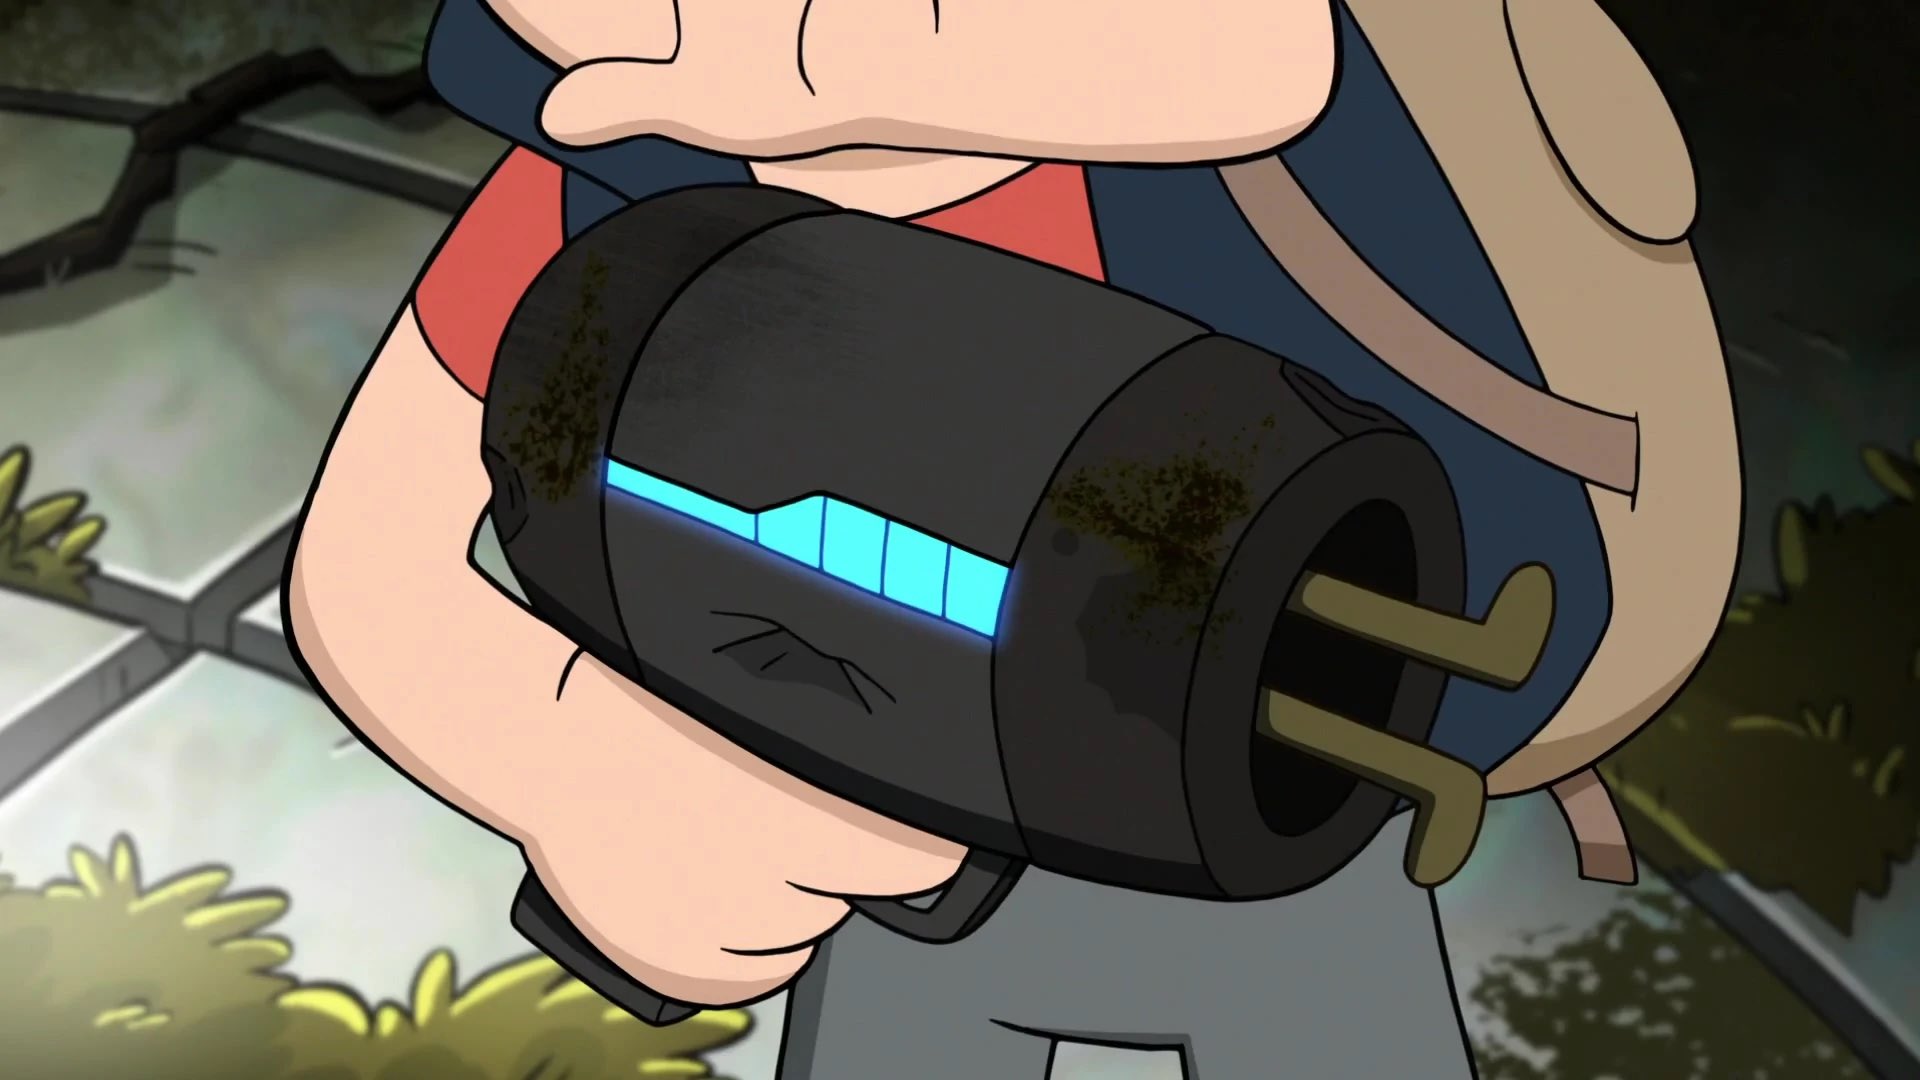 Grappling-Hook Rater on X: The magnet gun from gravity falls is Mabel's  gun's cool older brother that gets invited to all the parties. It is a grappling  hook because it is used